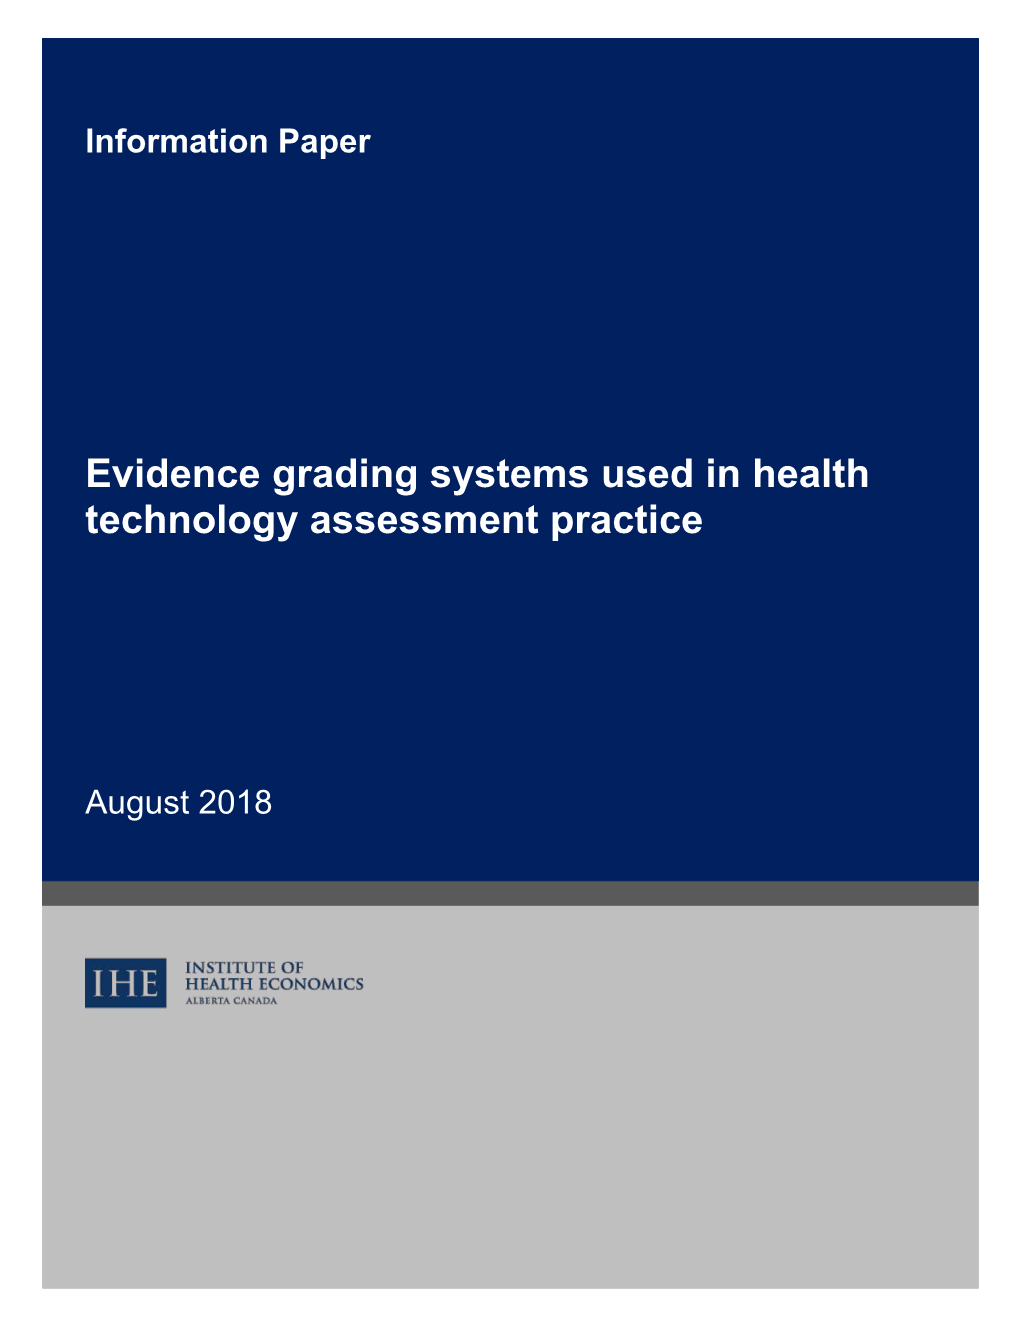 Evidence Grading Systems Used in Health Technology Assessment Practice